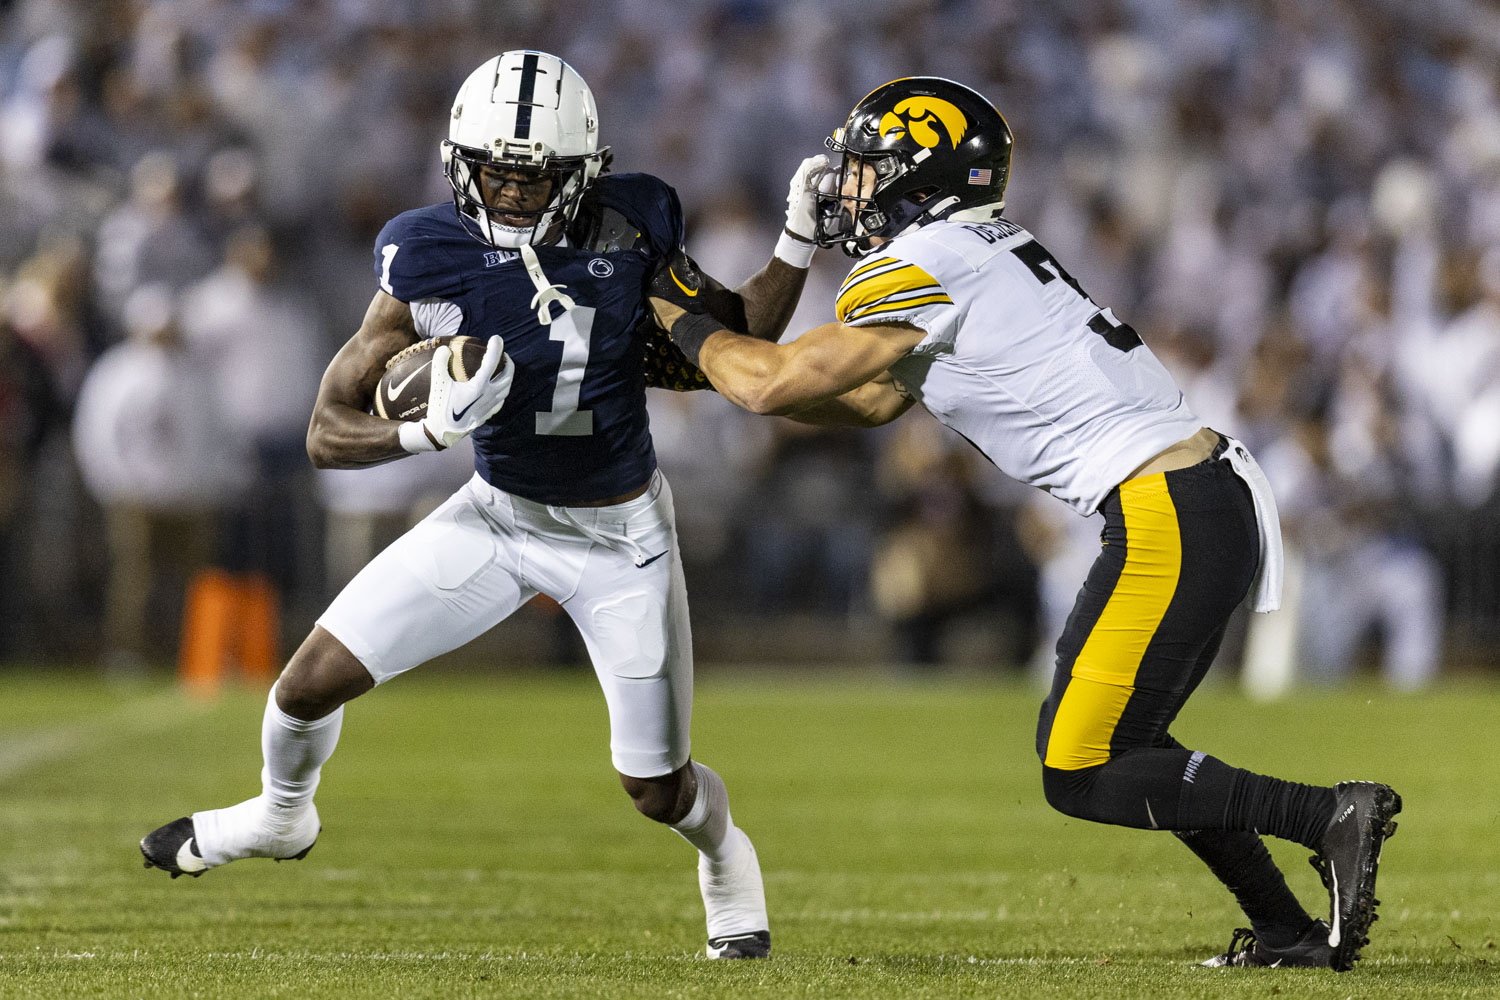 Penn State wide reciever KeAndre Lambert-Smith stiff arms Iowa defensive back Cooper DeJean during a football game between No. 24 Iowa and No. 7 Penn State at Beaver Stadium in State College, Pa., on Saturday, Sept. 23, 2023.